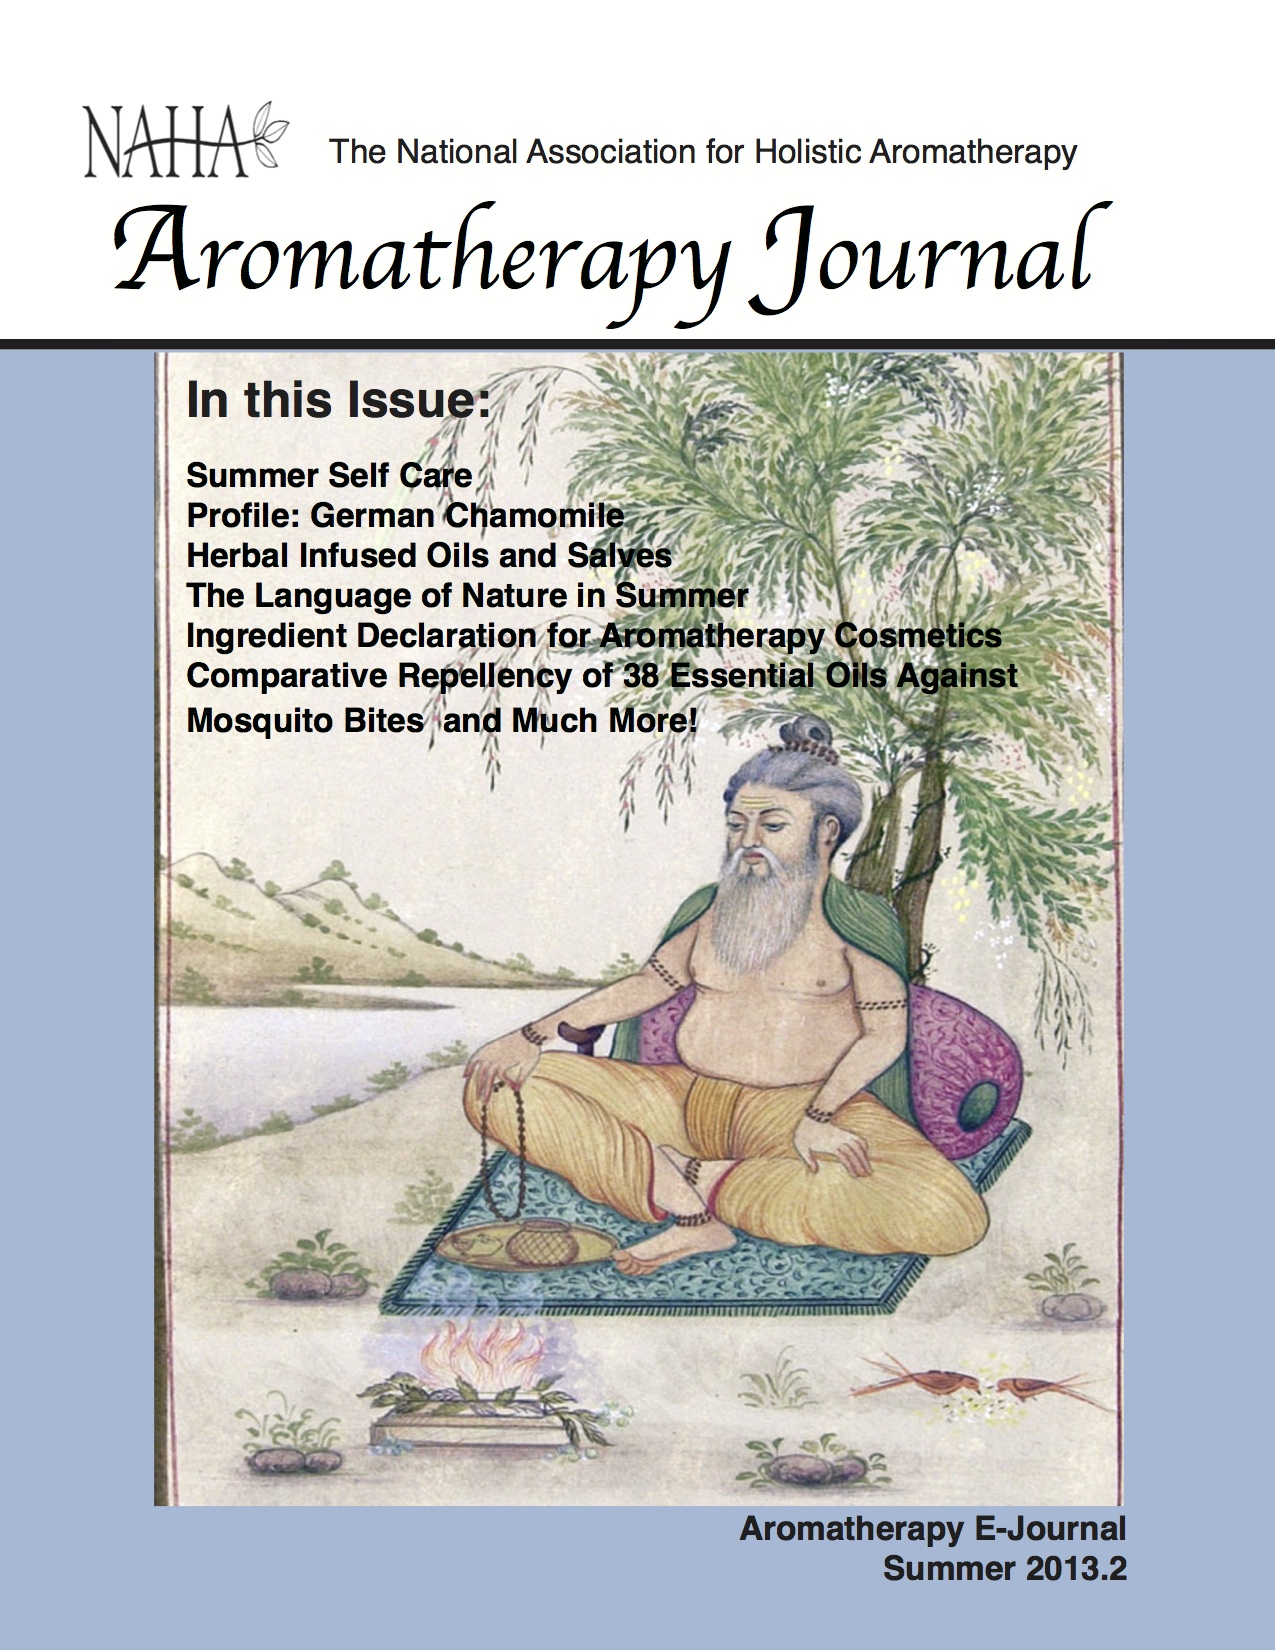 NAHA Aromatherapy Journal Issue Summer 2013.2